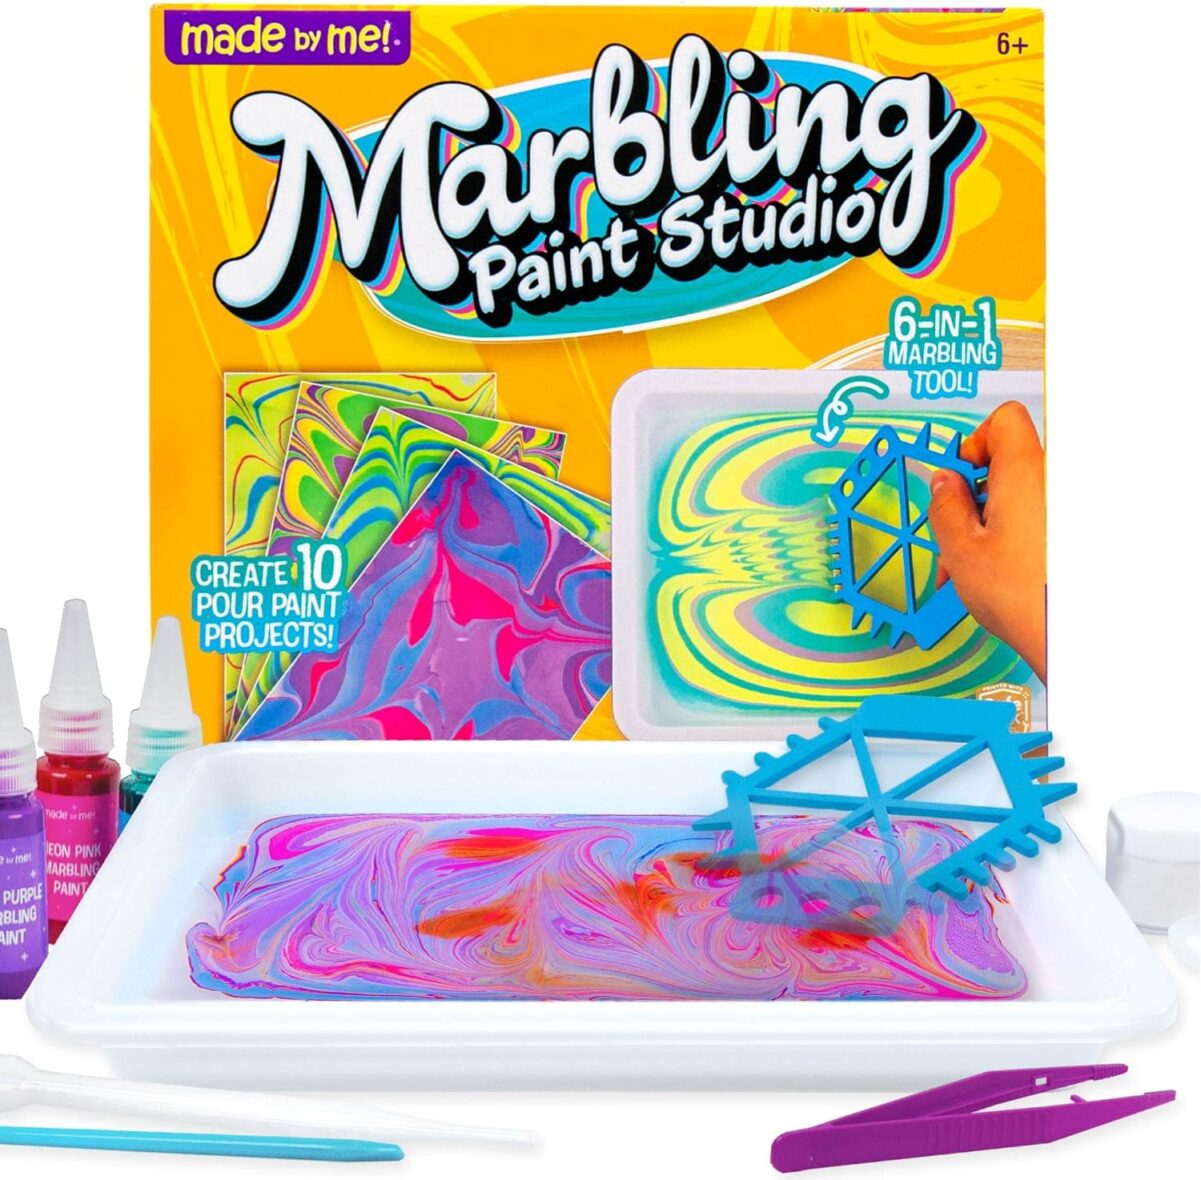 Made By Me Marbling Paint Studio, 25-Piece Marbling Kit for Kids, Make 10 Pour Paint Art Projects, Dip & Paint Marbling Arts & Crafts Kits for Kids